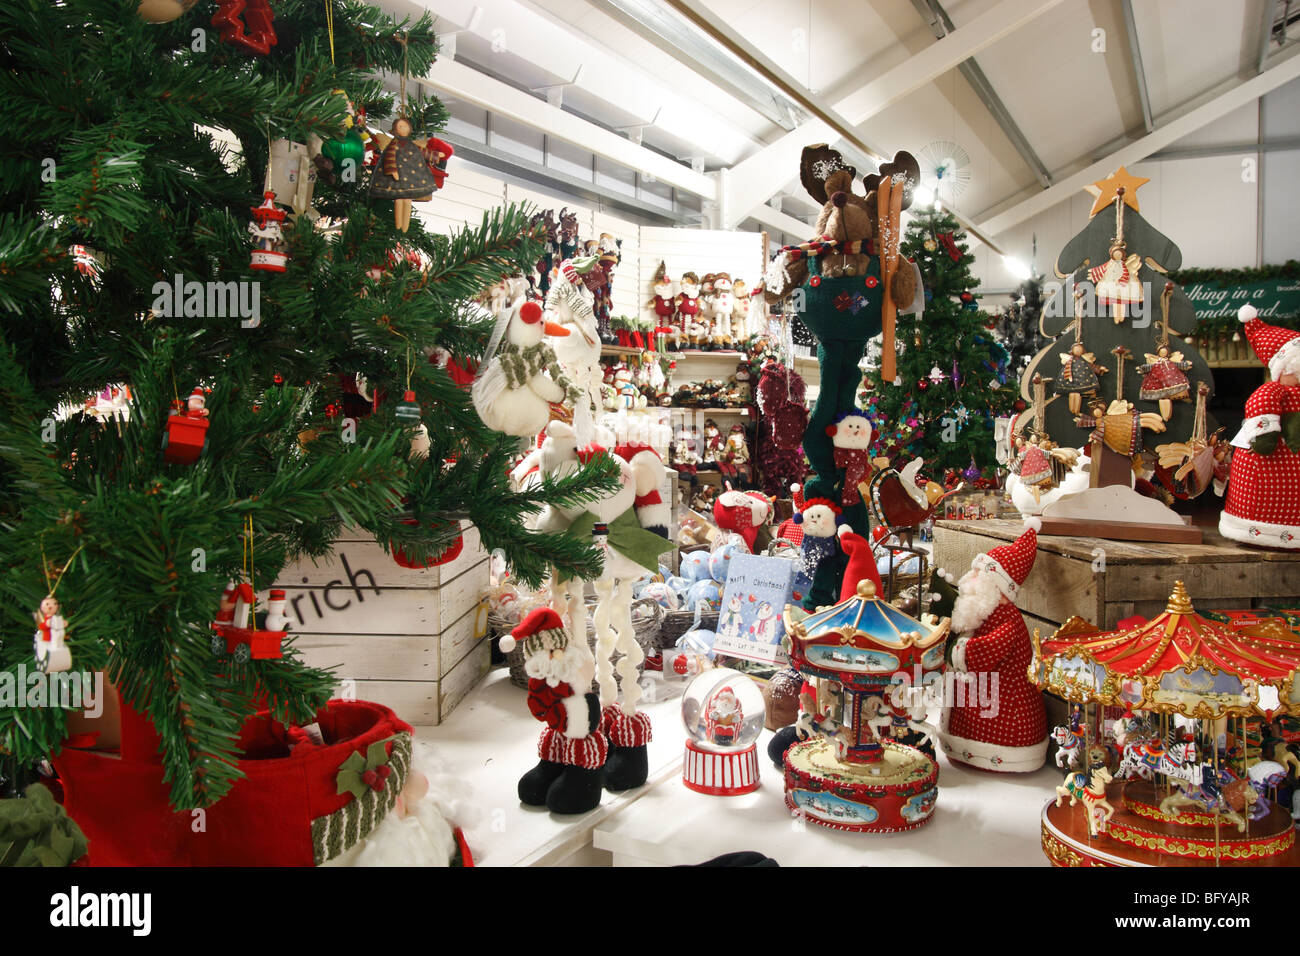 A Snow Man Father Christmas And Other Christmas Decorations On Sale Stock Photo Alamy